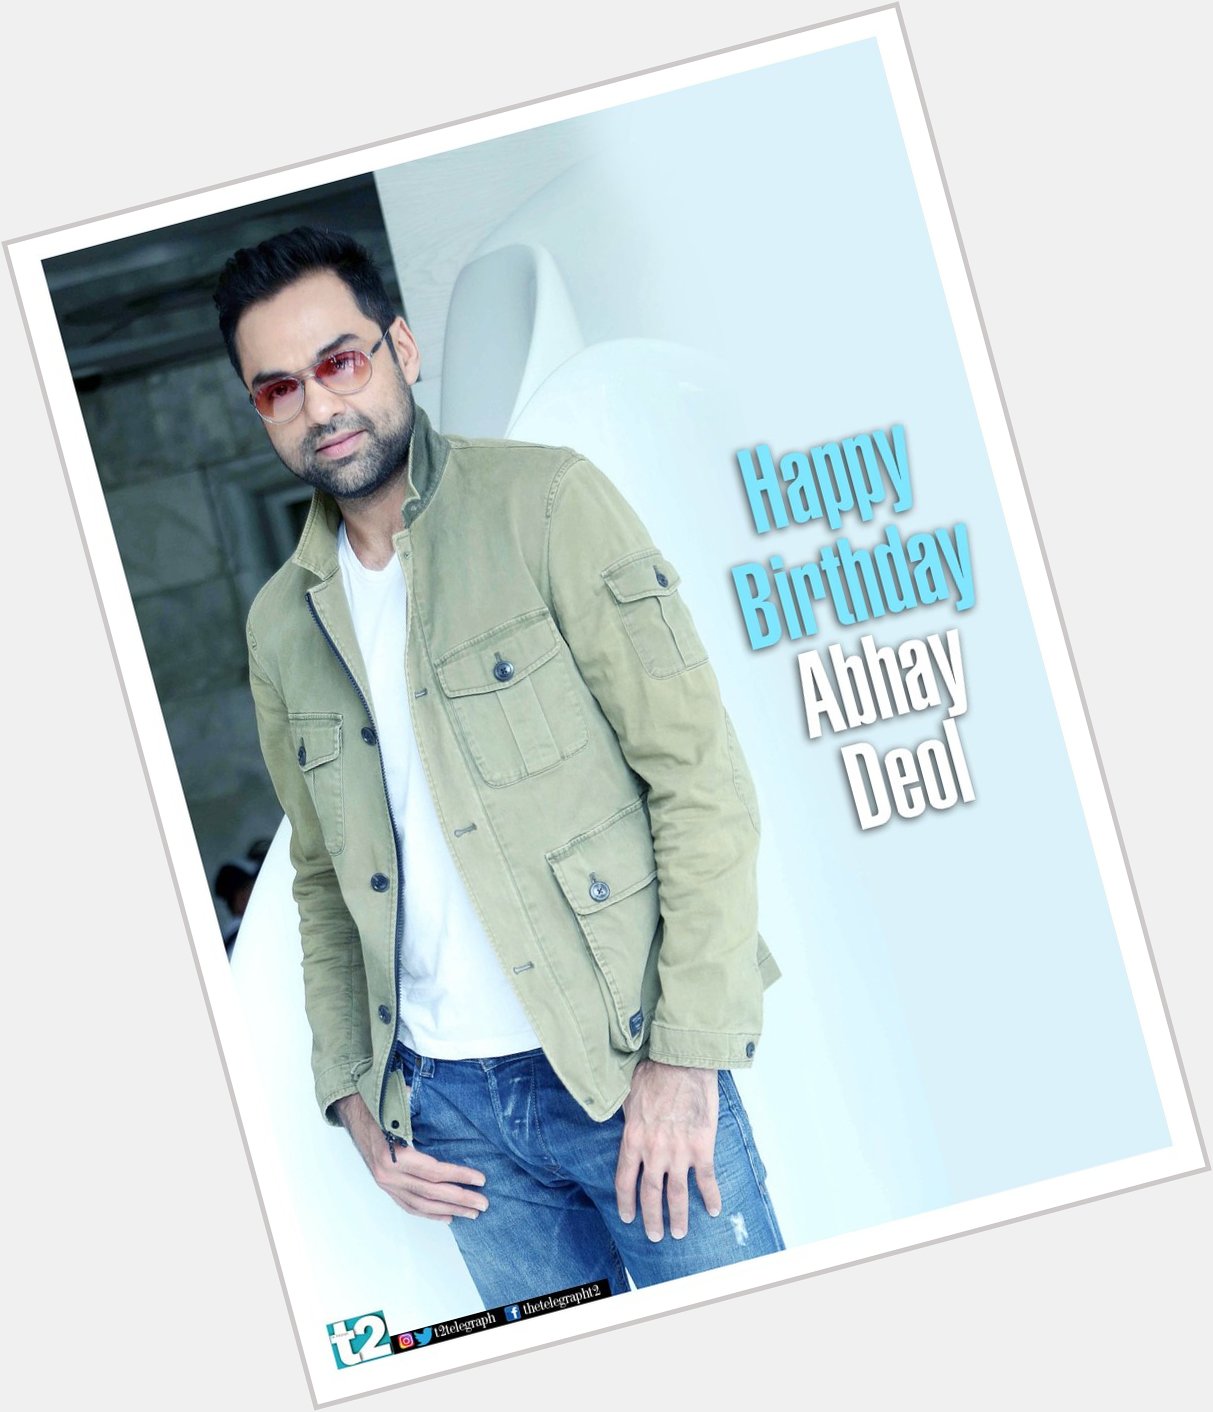 Pure talent or straight talk, there is nobody quite like Abhay Deol. Happy birthday! 